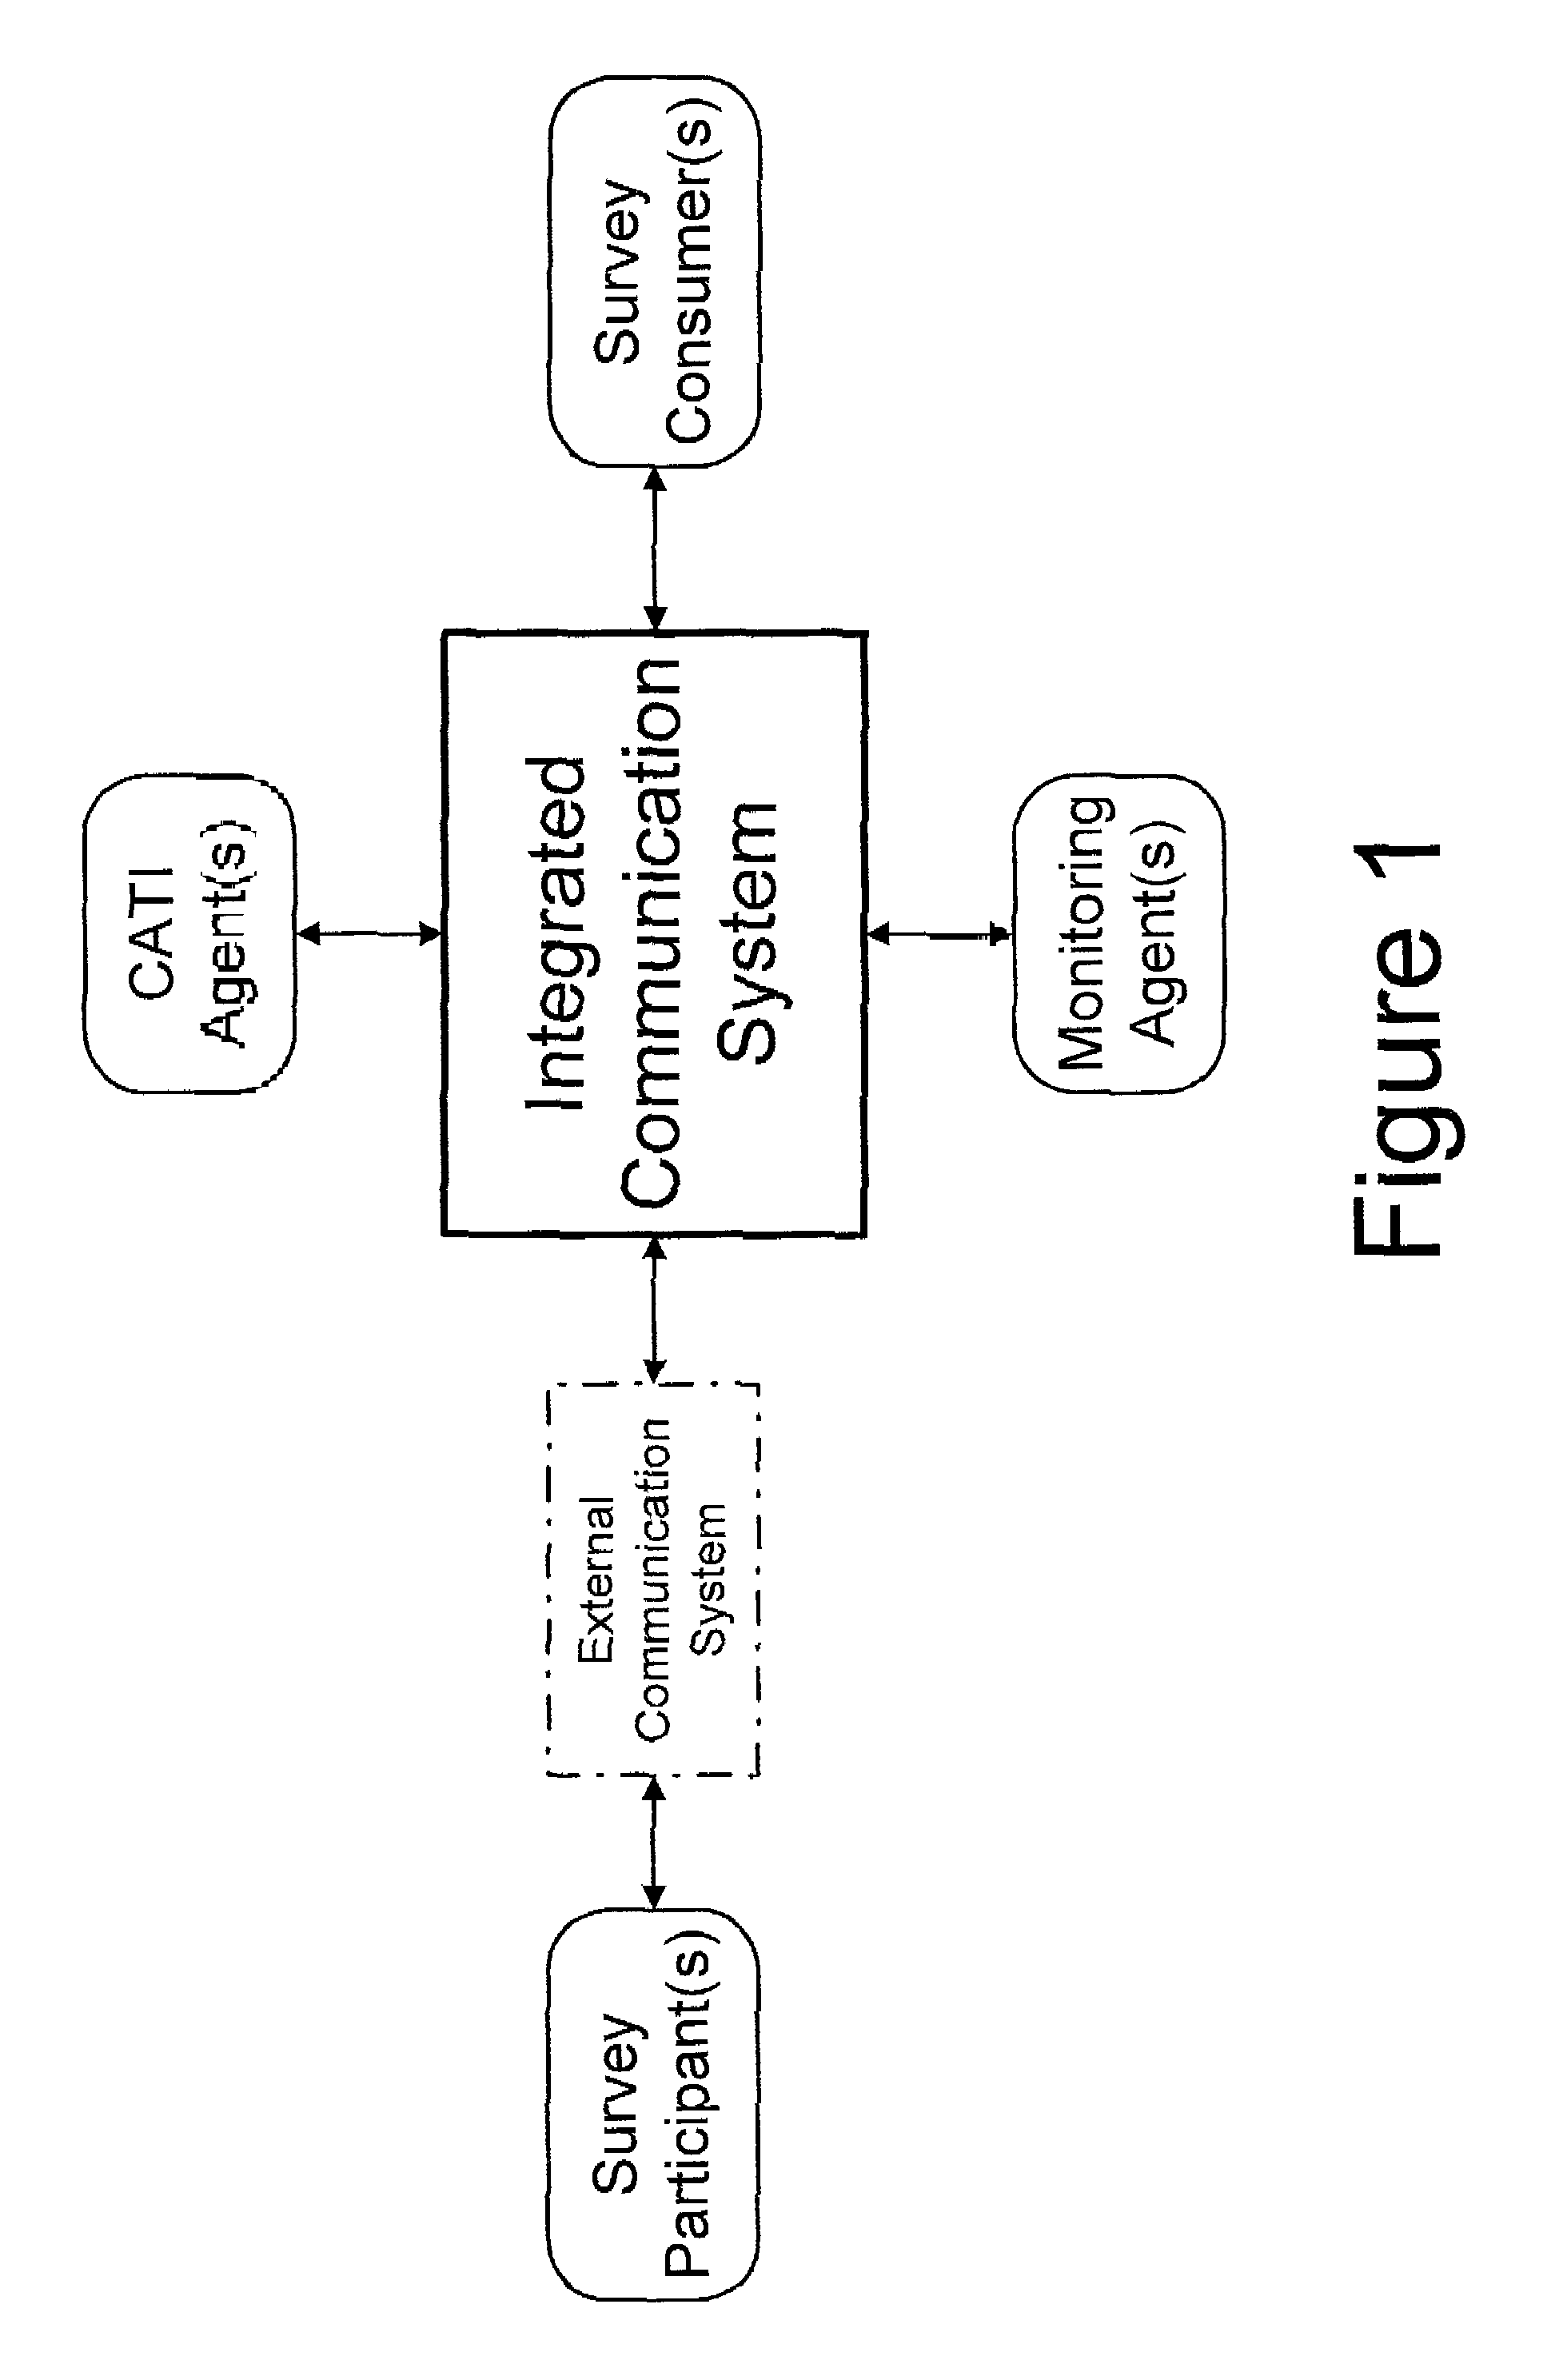 Integrated communication system and method